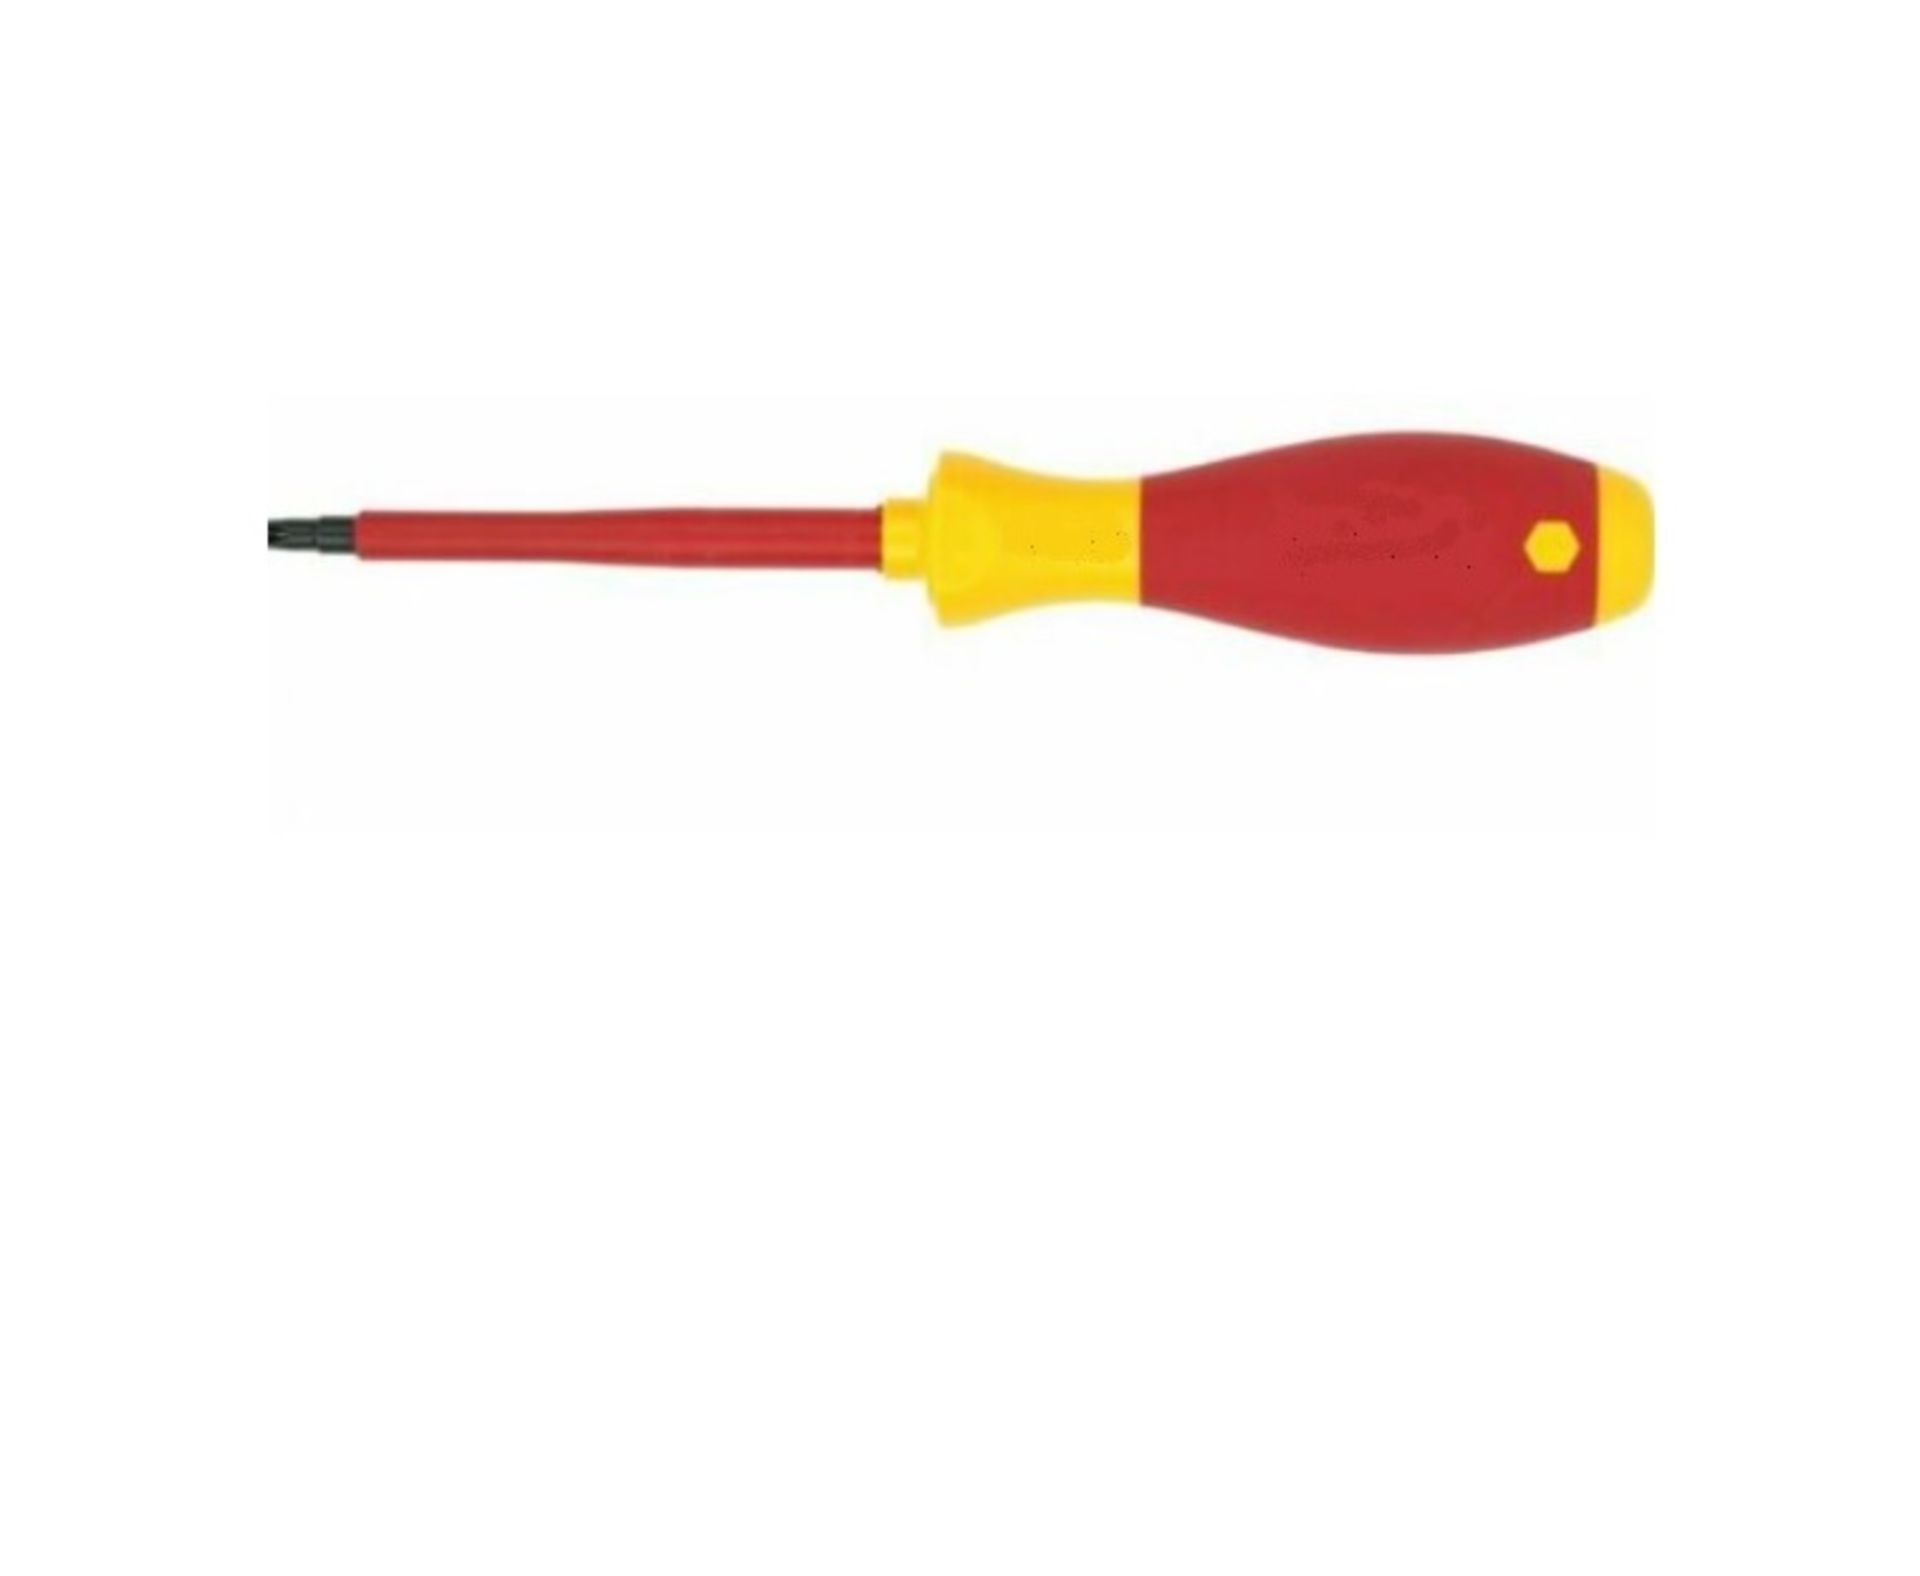 5 x Toolwise TSDPH1 TS Screwdriver Phillips 1-- Retail value £4.99 each